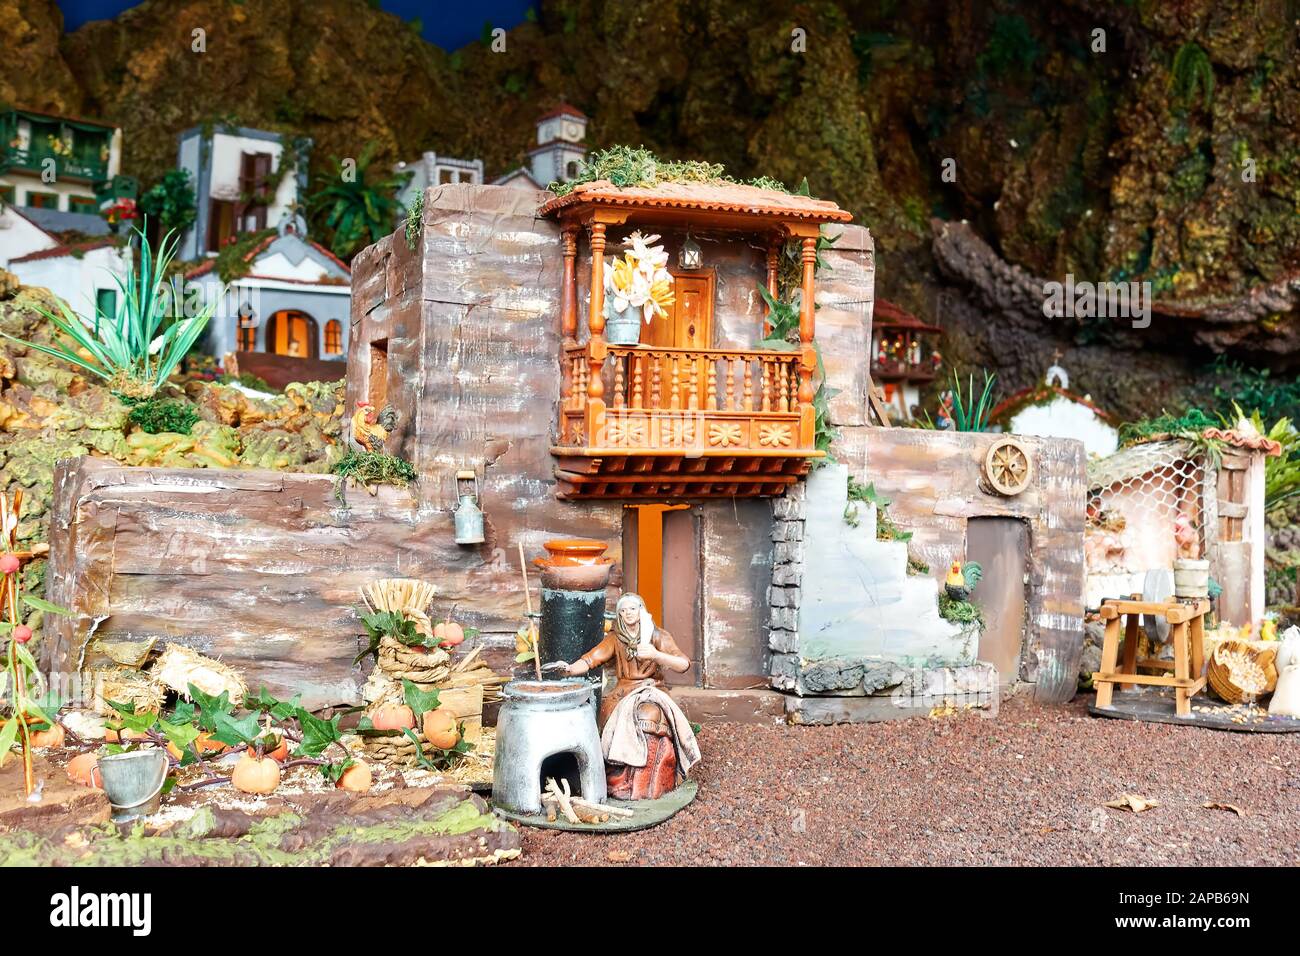 Candelaria, Tenerife, Spain - December 12, 2019: Detail of Christmas Belen -  Crib, Nativity Scene, statuettes of people and houses in miniature Stock Photo